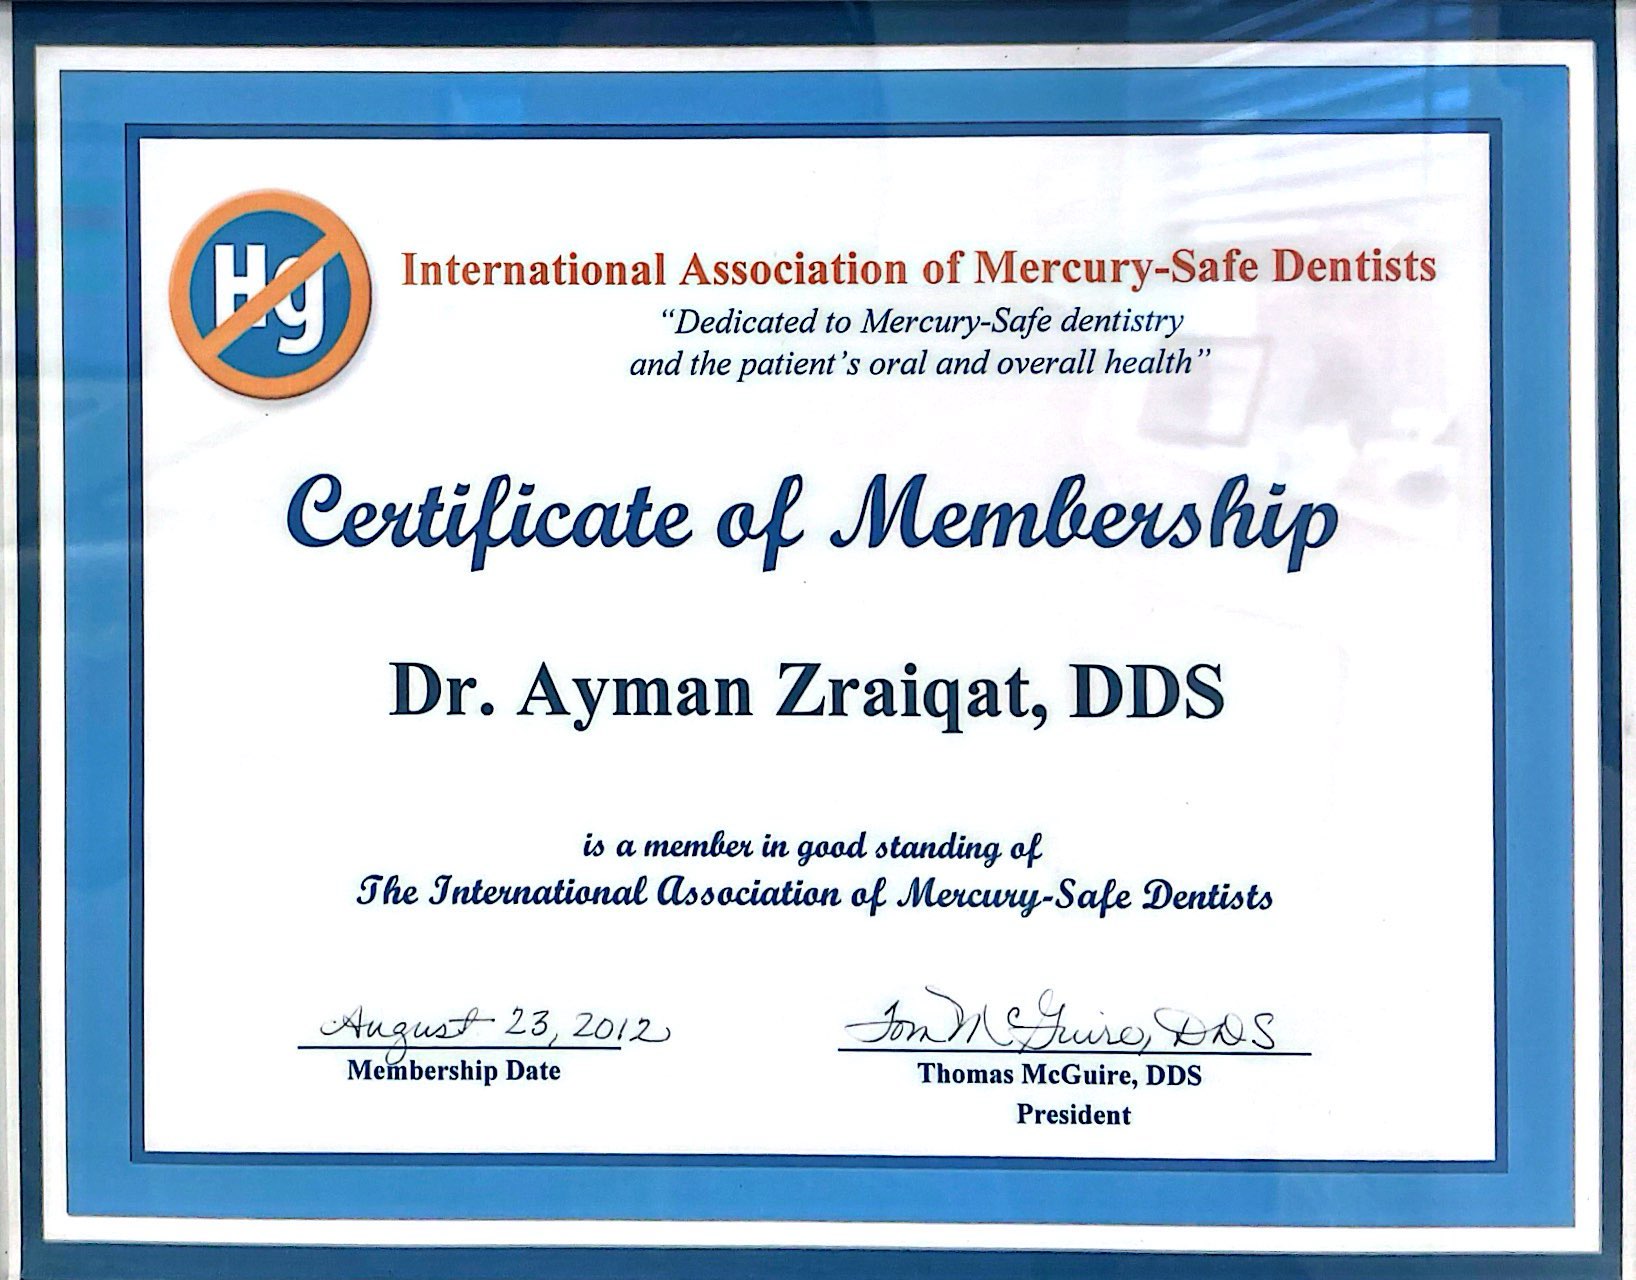 Certificate of Membership for Dr. Ayman Zraiqat, DDS, from the International Association of Mercury-Safe Dentists, dated August 23, 2012.